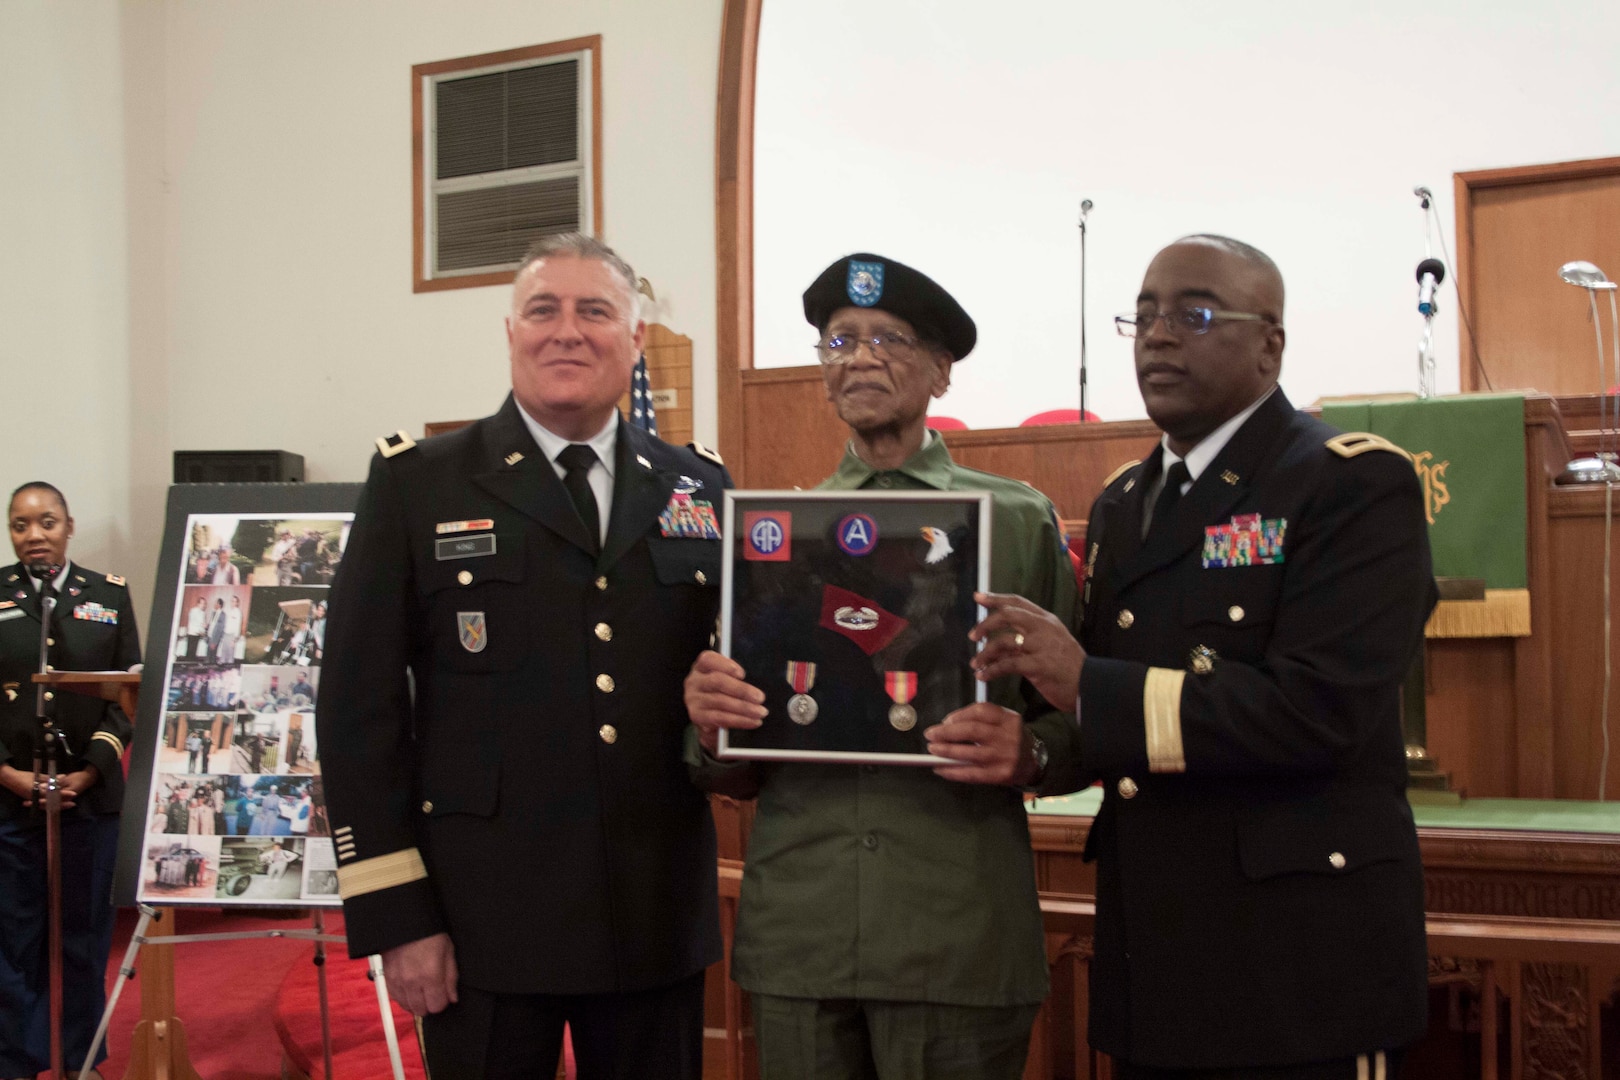 DLA Distribution commander Army Brig. Gen. Richard Dix, on right, and Deputy Commanding General, National Guard Army Brig. Gen. John King, left, present veteran Army Sgt. Earnest Felton Jett, Sr., with medals and badges for his service in World War II.